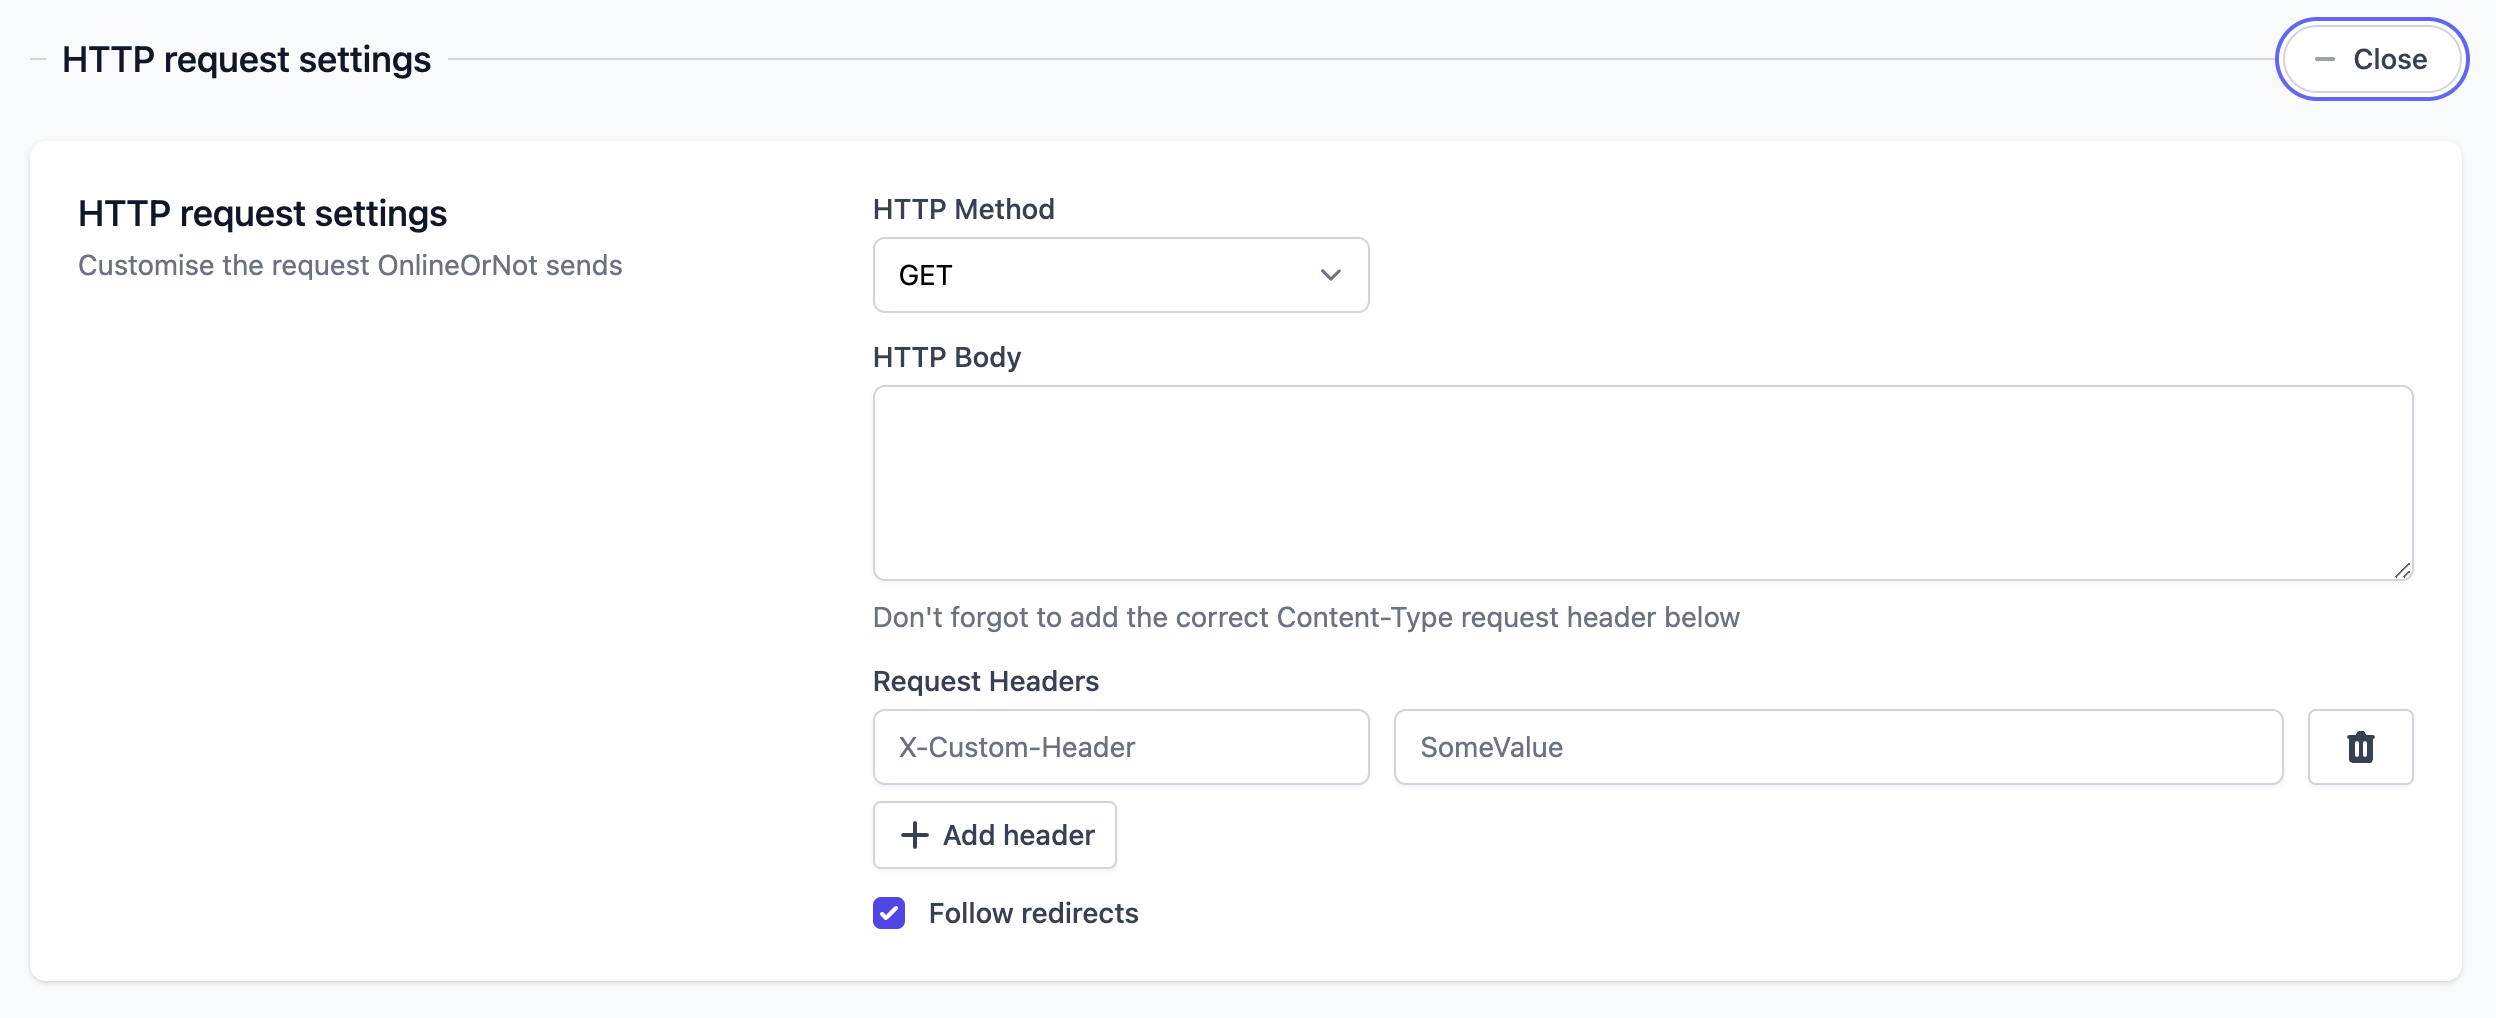 HTTP request settings section